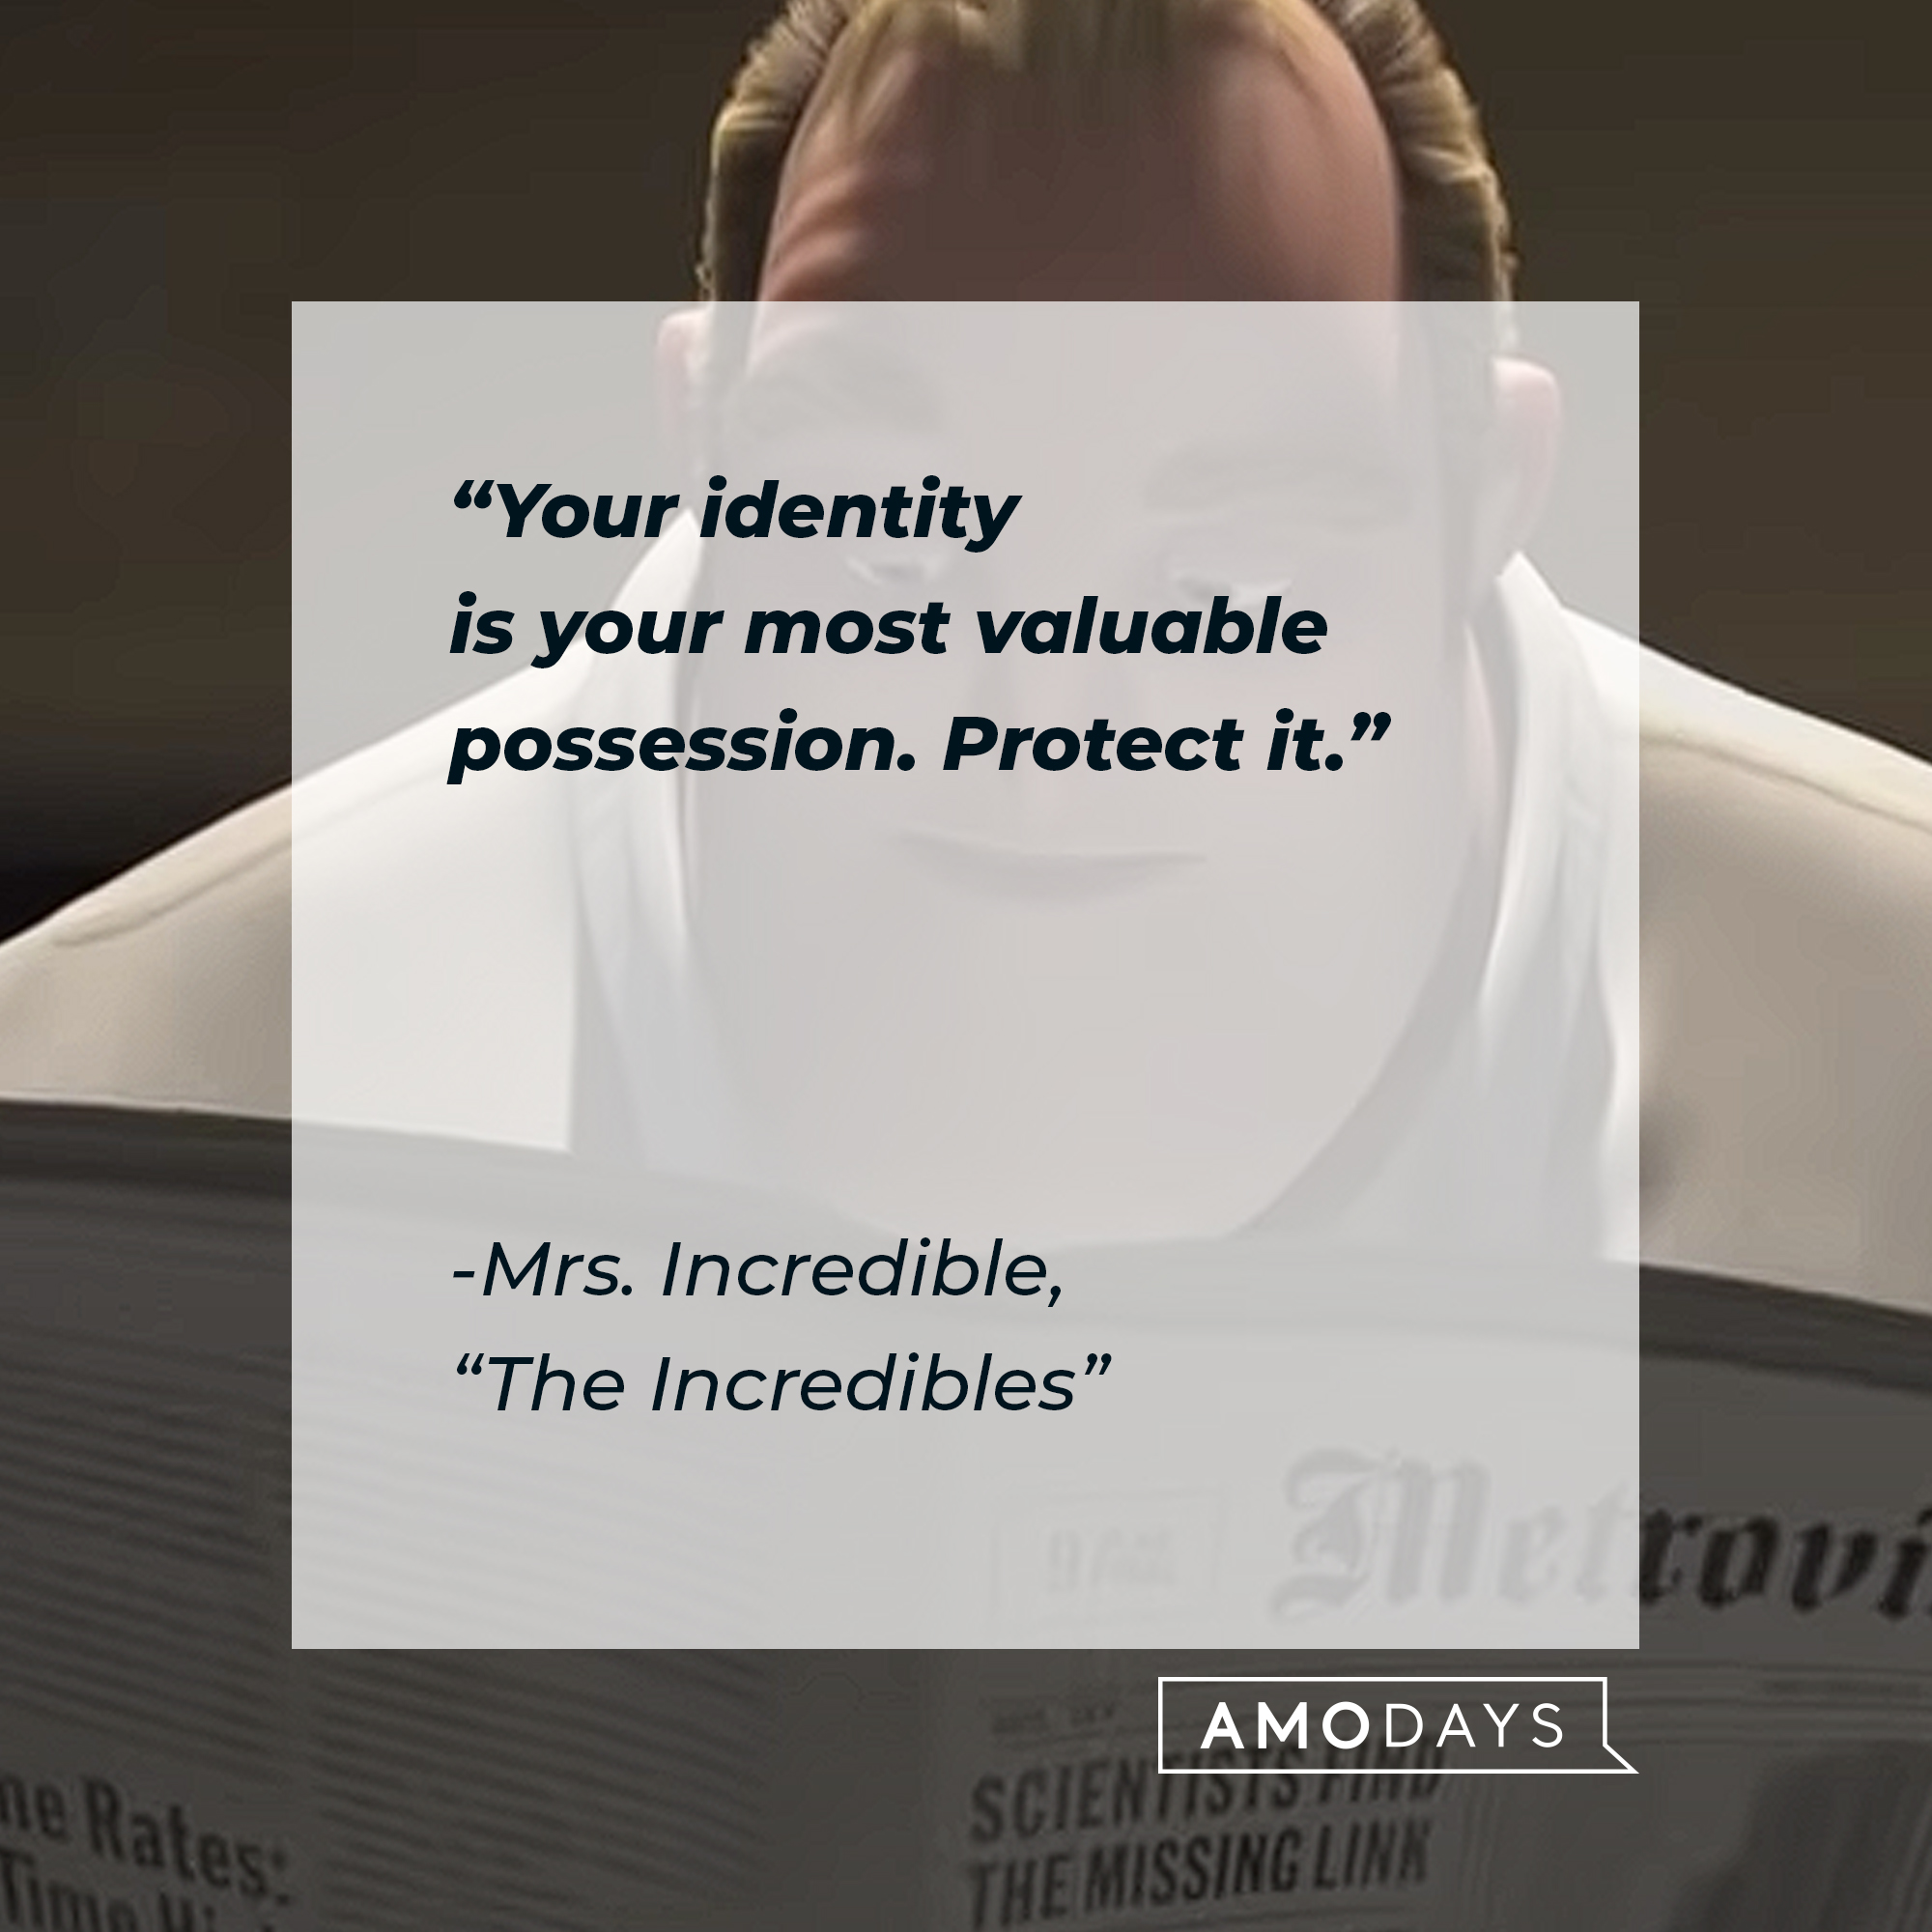 Mrs. Incredible's "The Incredibles" quote: "Your identity is your most valuable possession. Protect it." | Source: Youtube.com/pixar